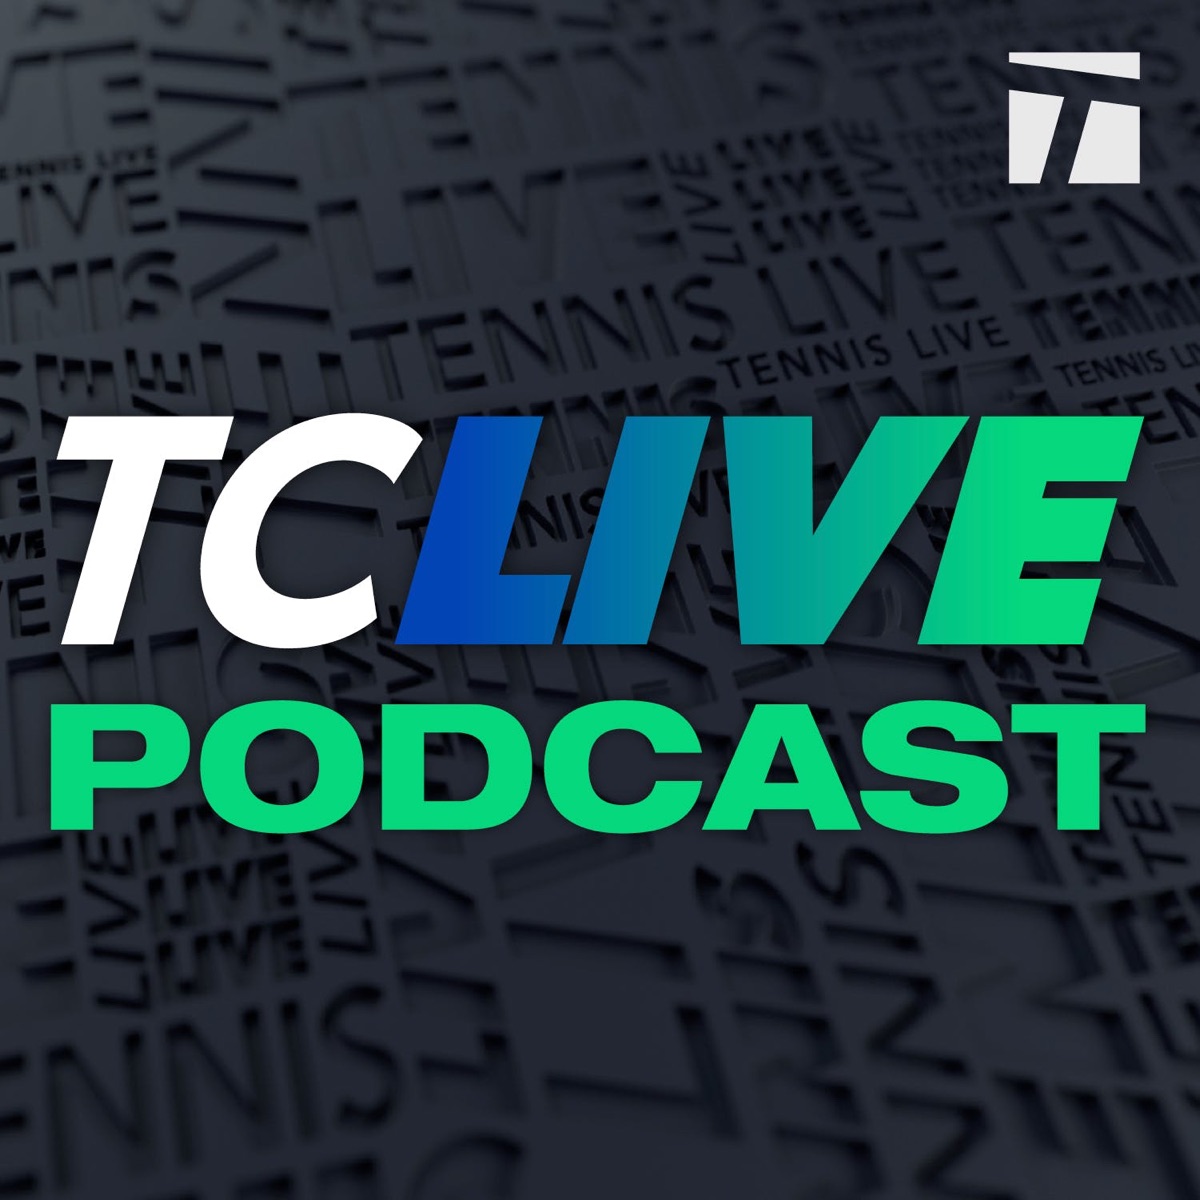 Tennis Channel Live Podcast – Podcast